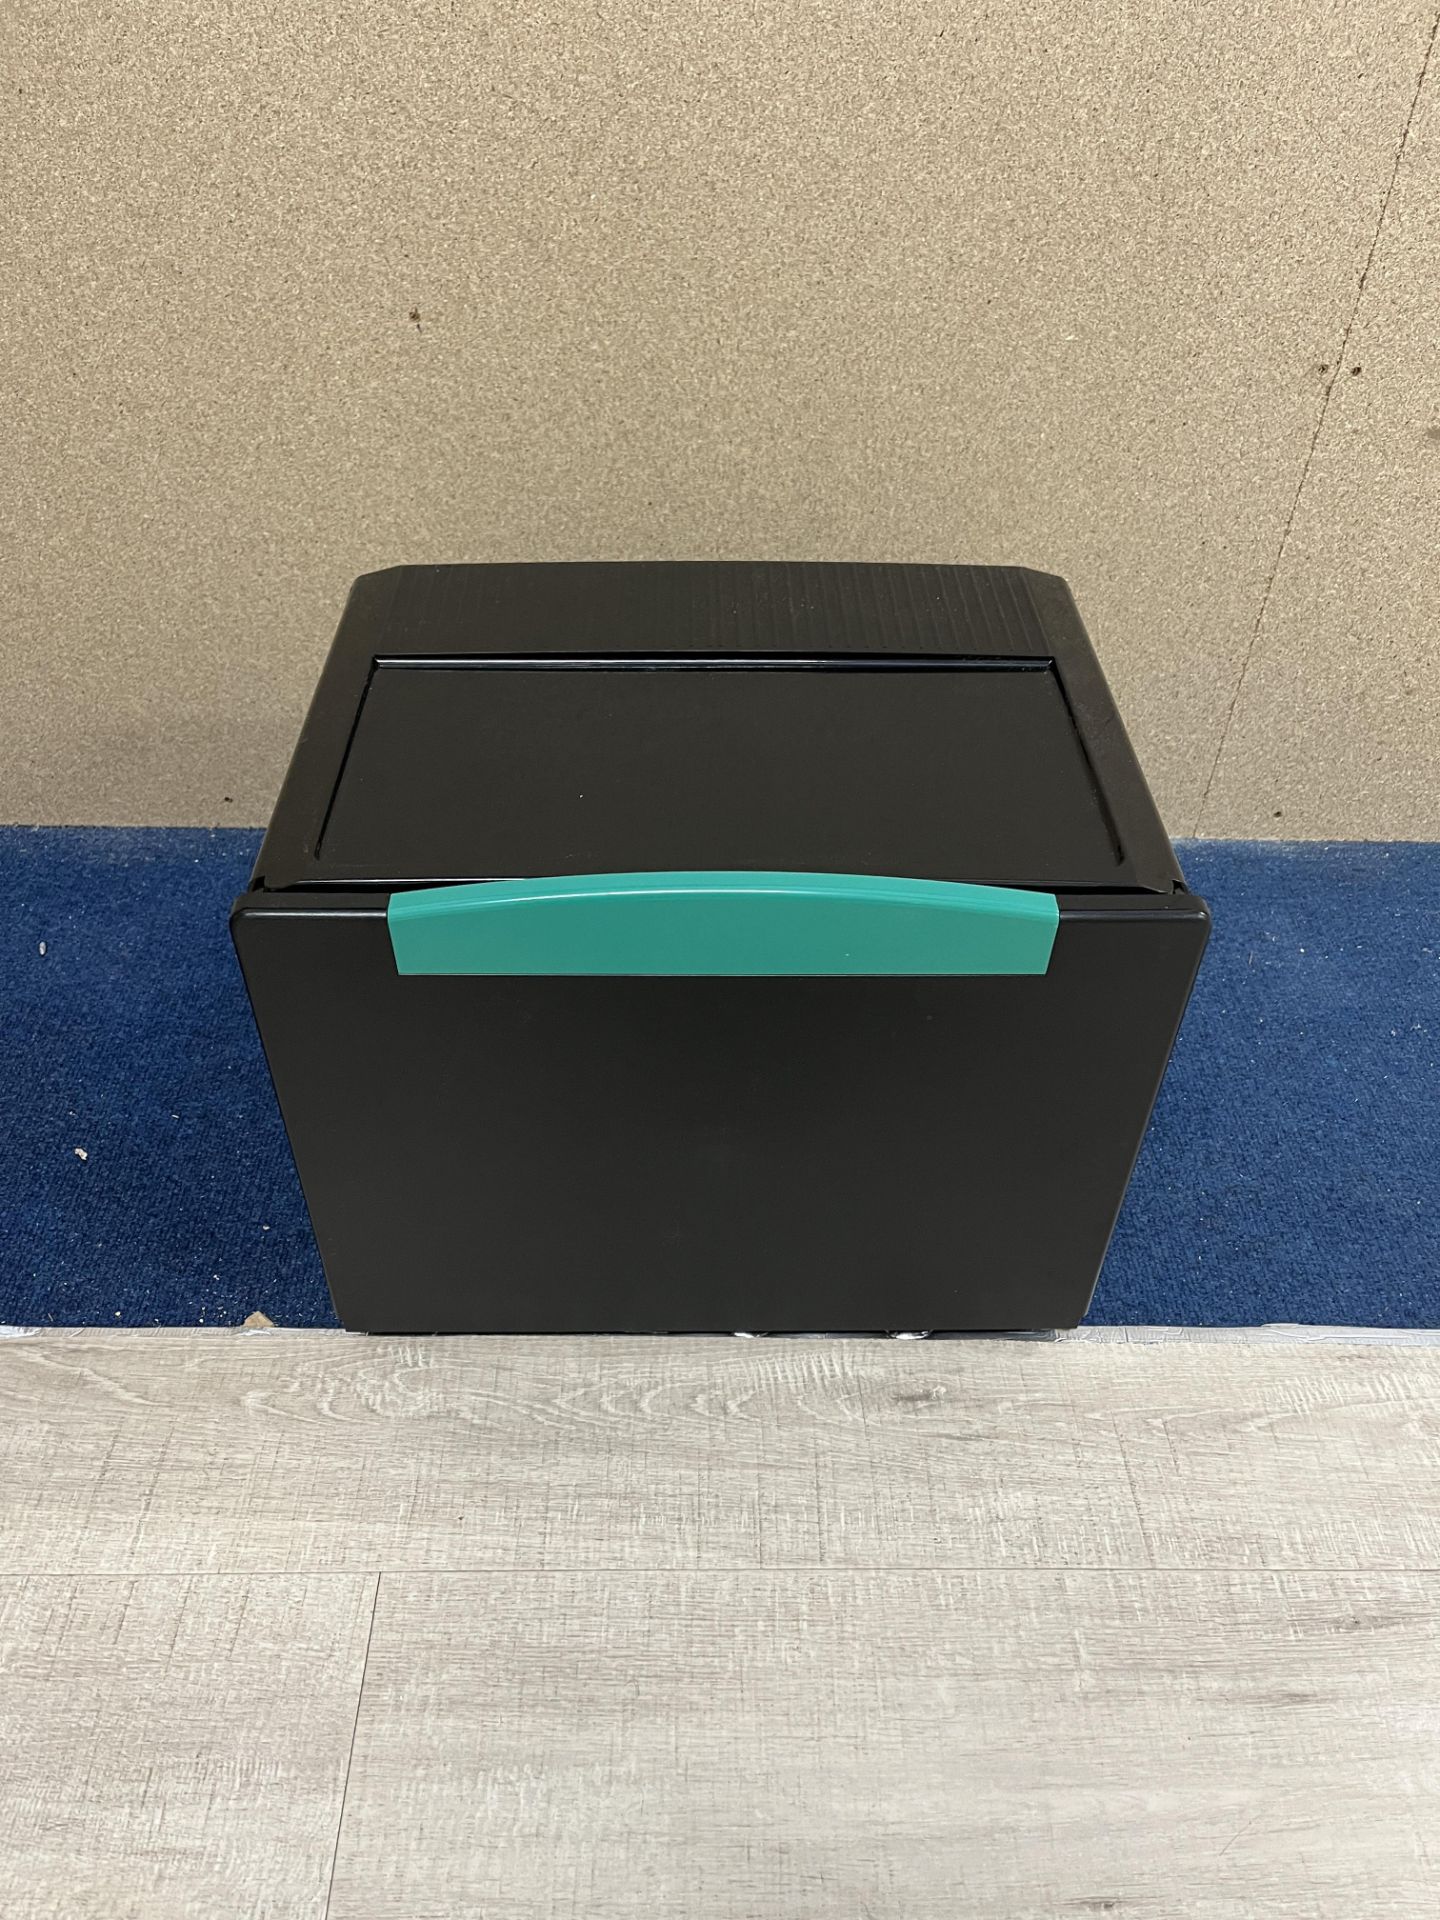 3 x Various Pull Out Bins for Kitchen Drawers